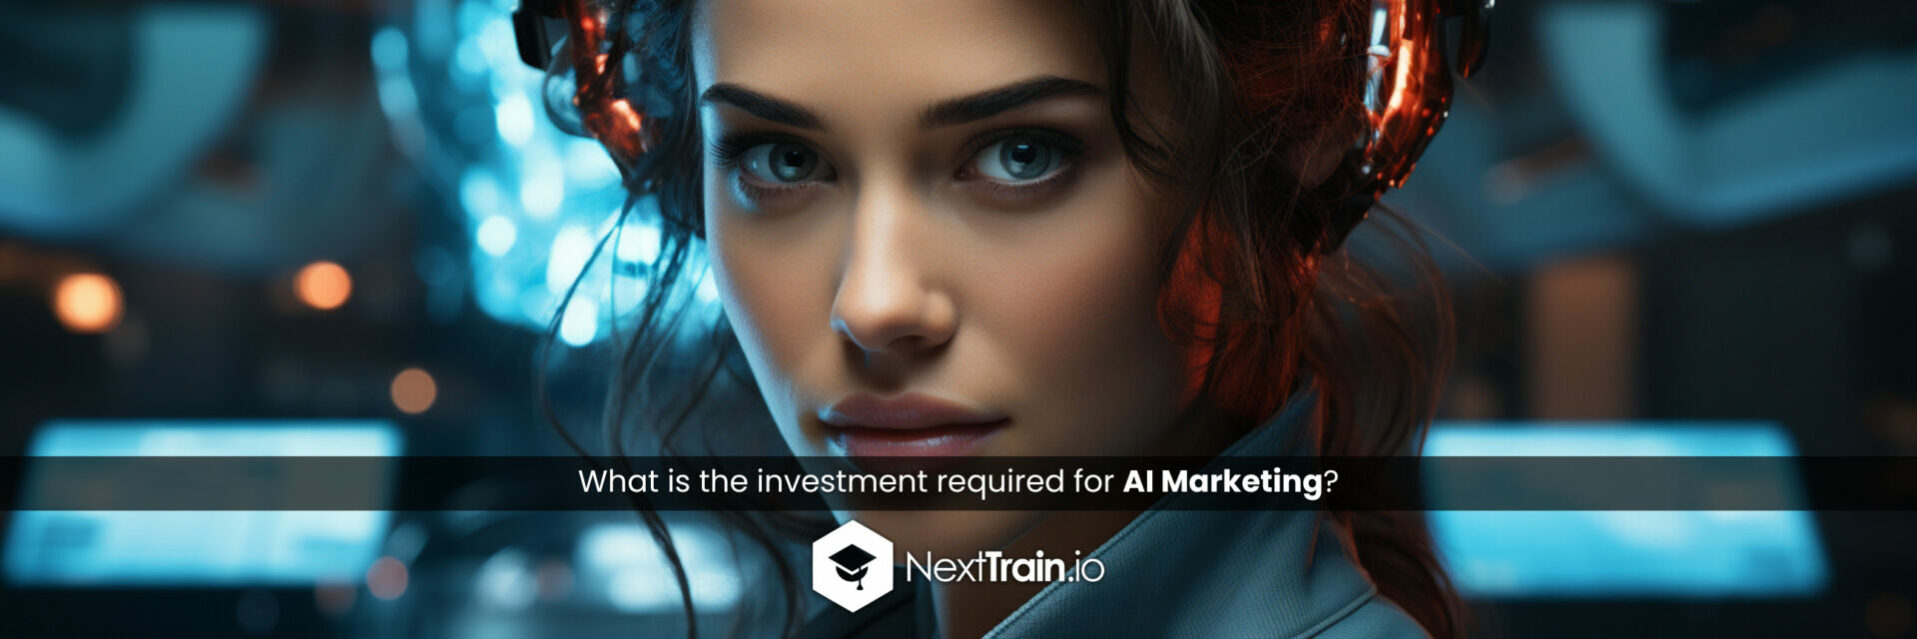 What is the investment required for AI Marketing?